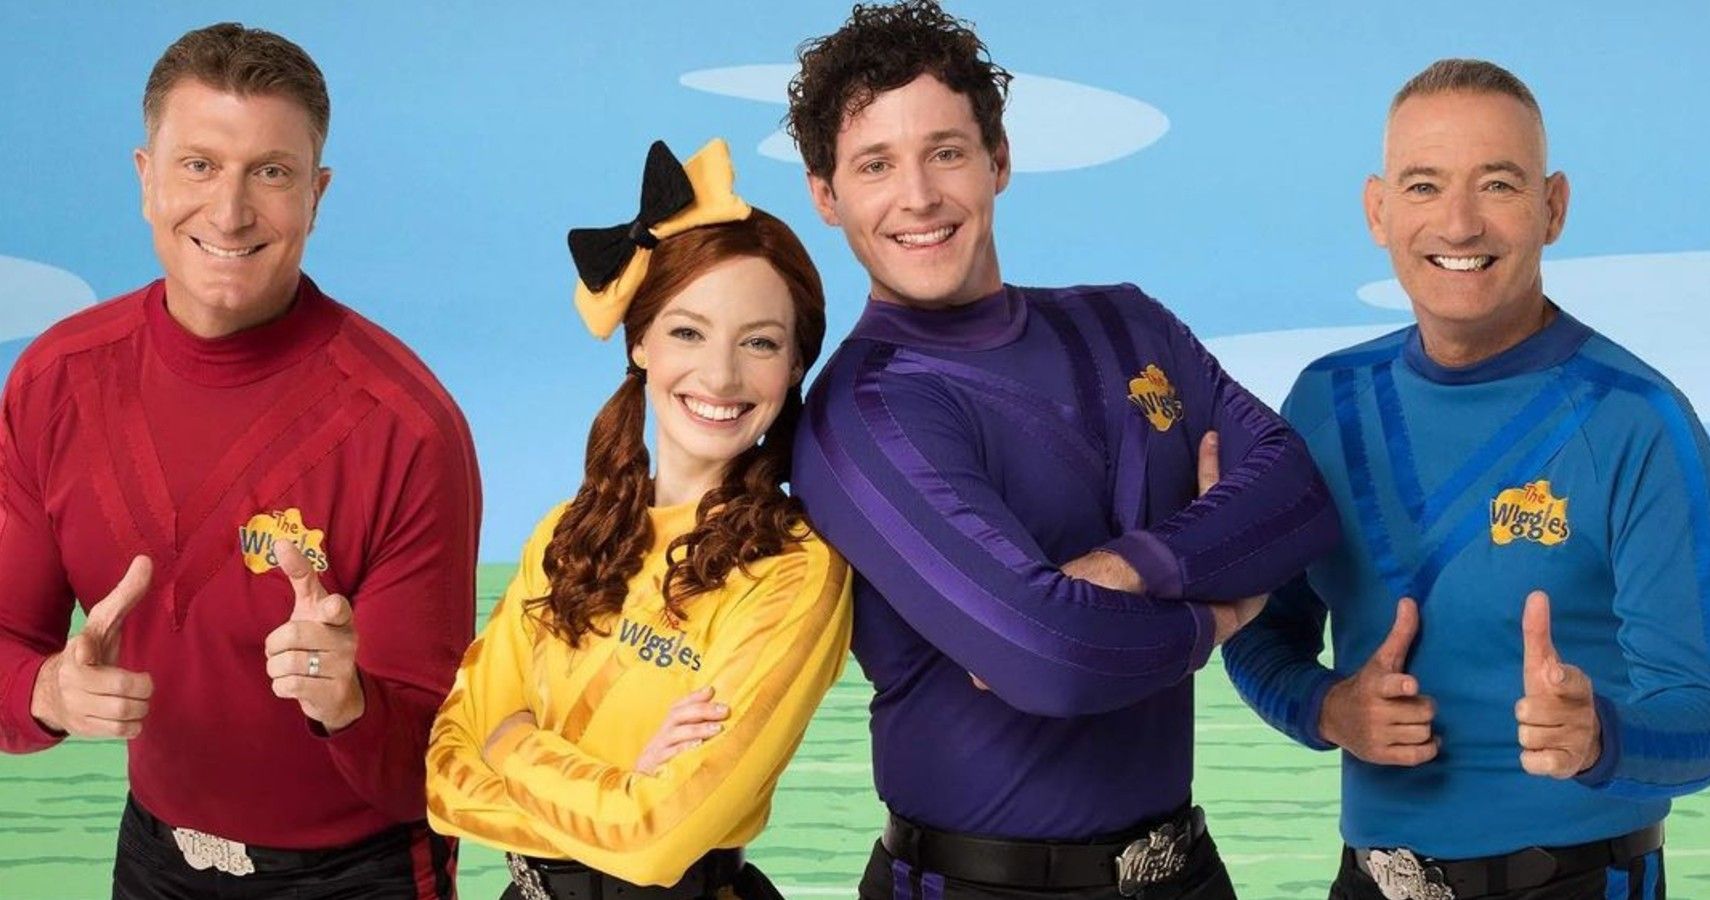 The Wiggles Songs, Ranked